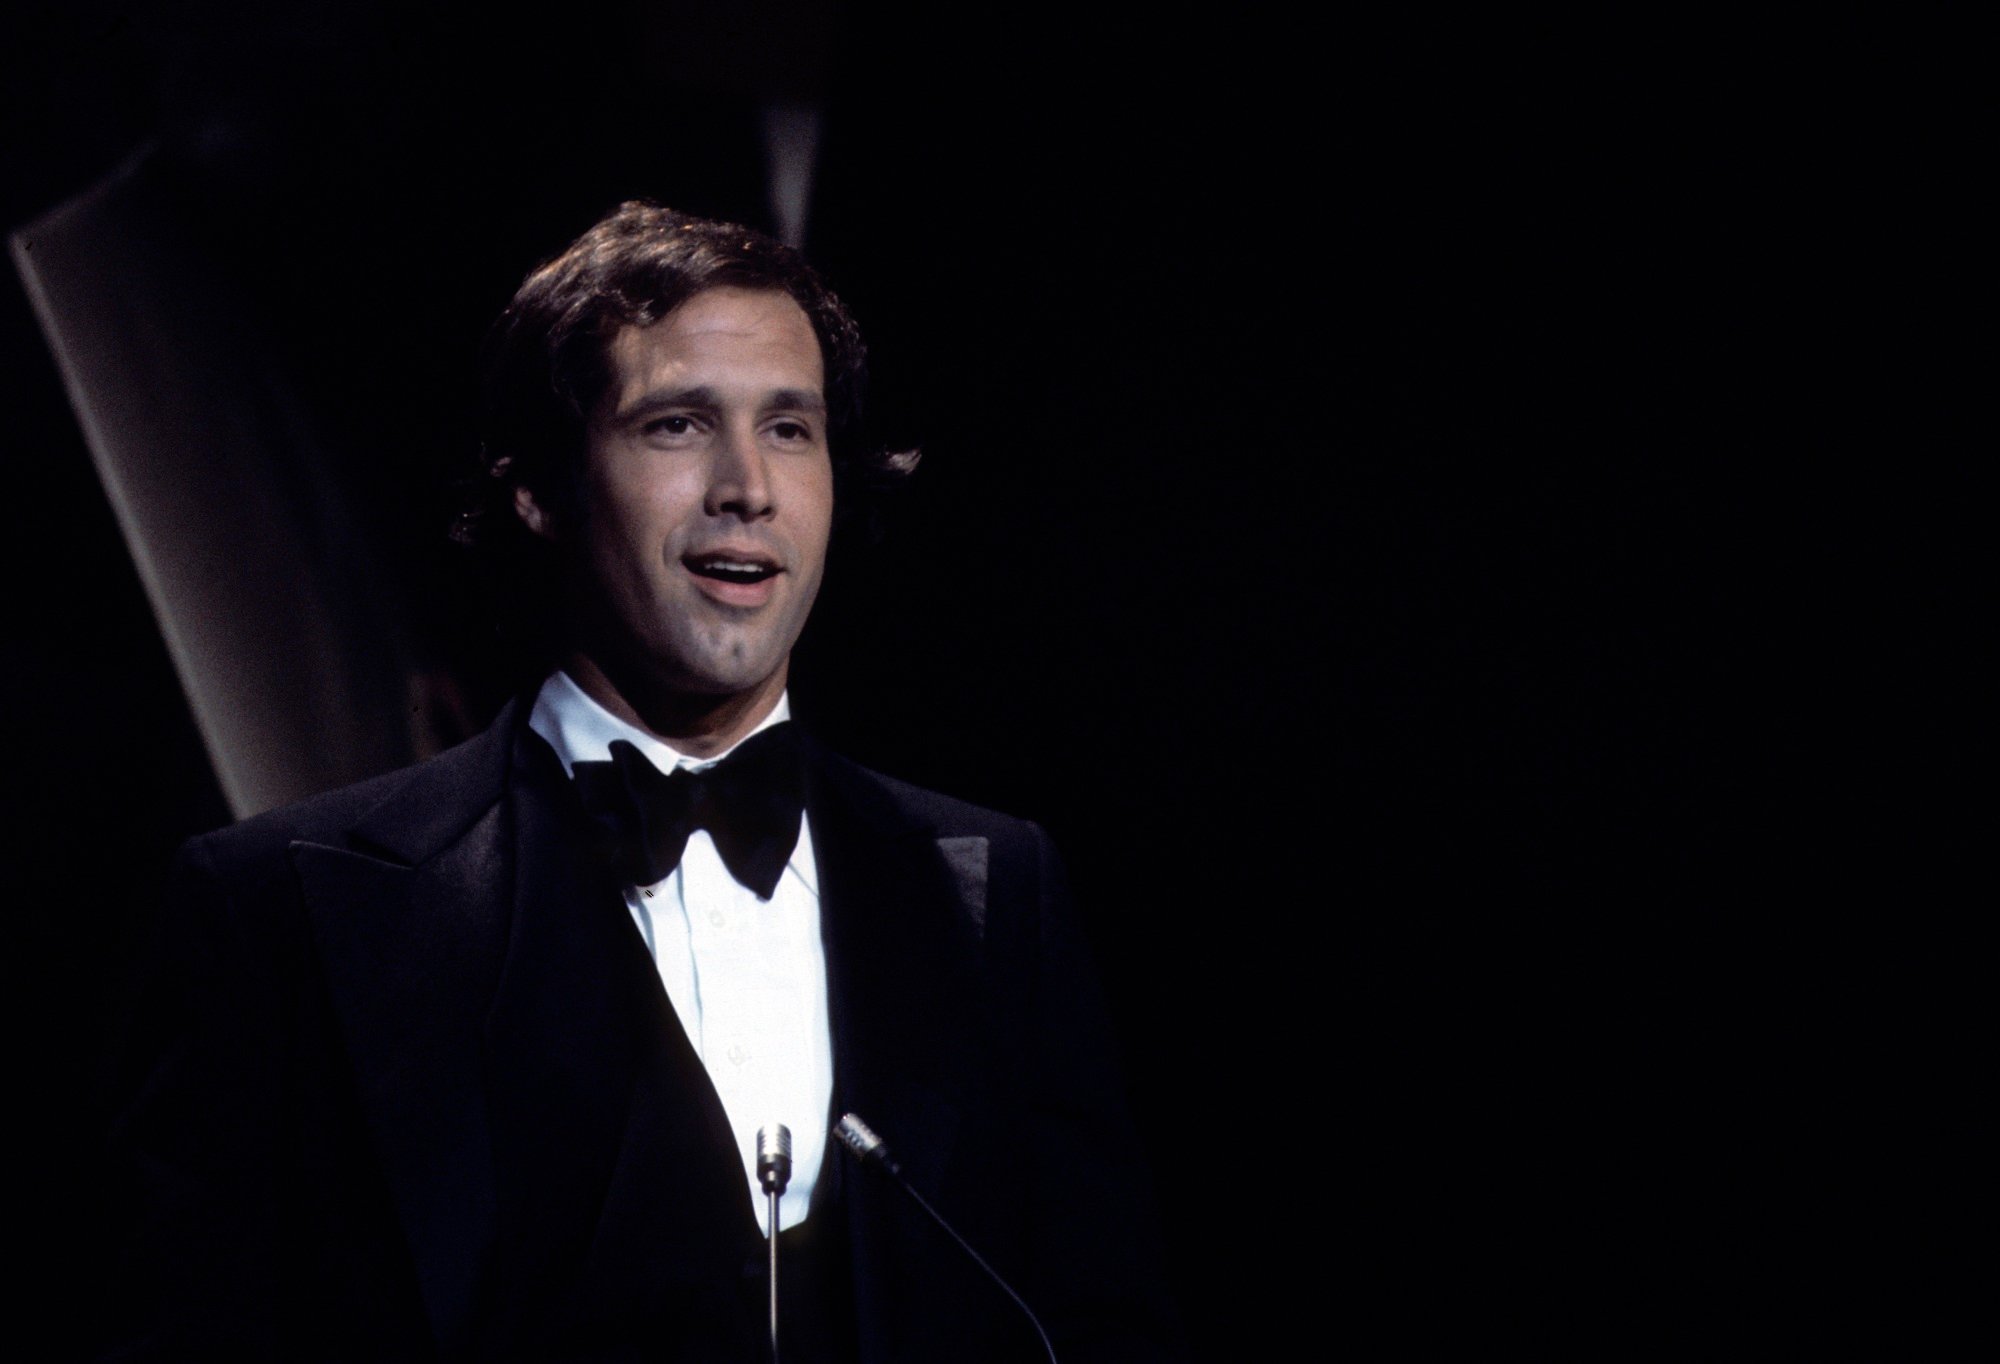 Chevy Chase wearing a tuxedo